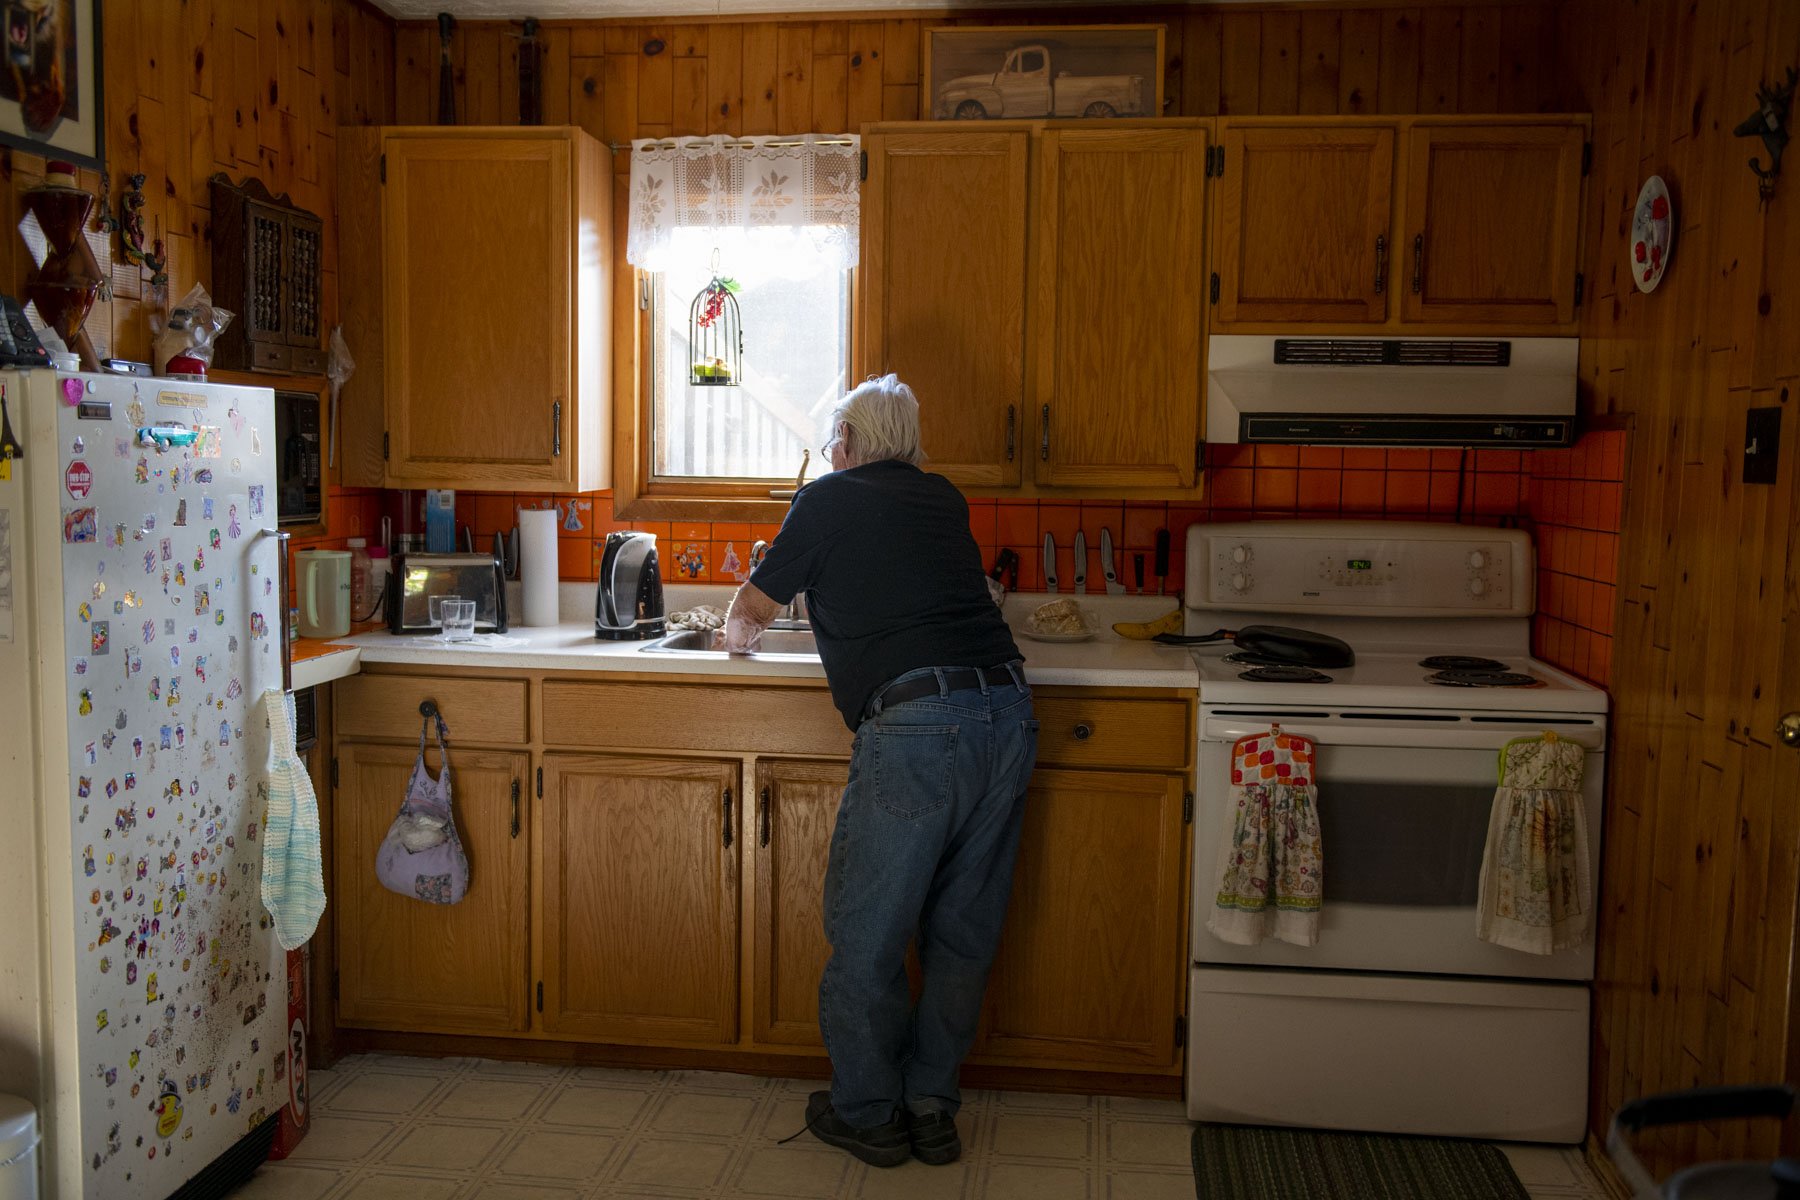  Clermont Fortier has lived in his log home for more than five decades. He loves the neighbourhood, but like many others, finds the regulations and city bylaws frustrating and cumbersome. “I know how to fix my home and maintain it, it’s simple, but t